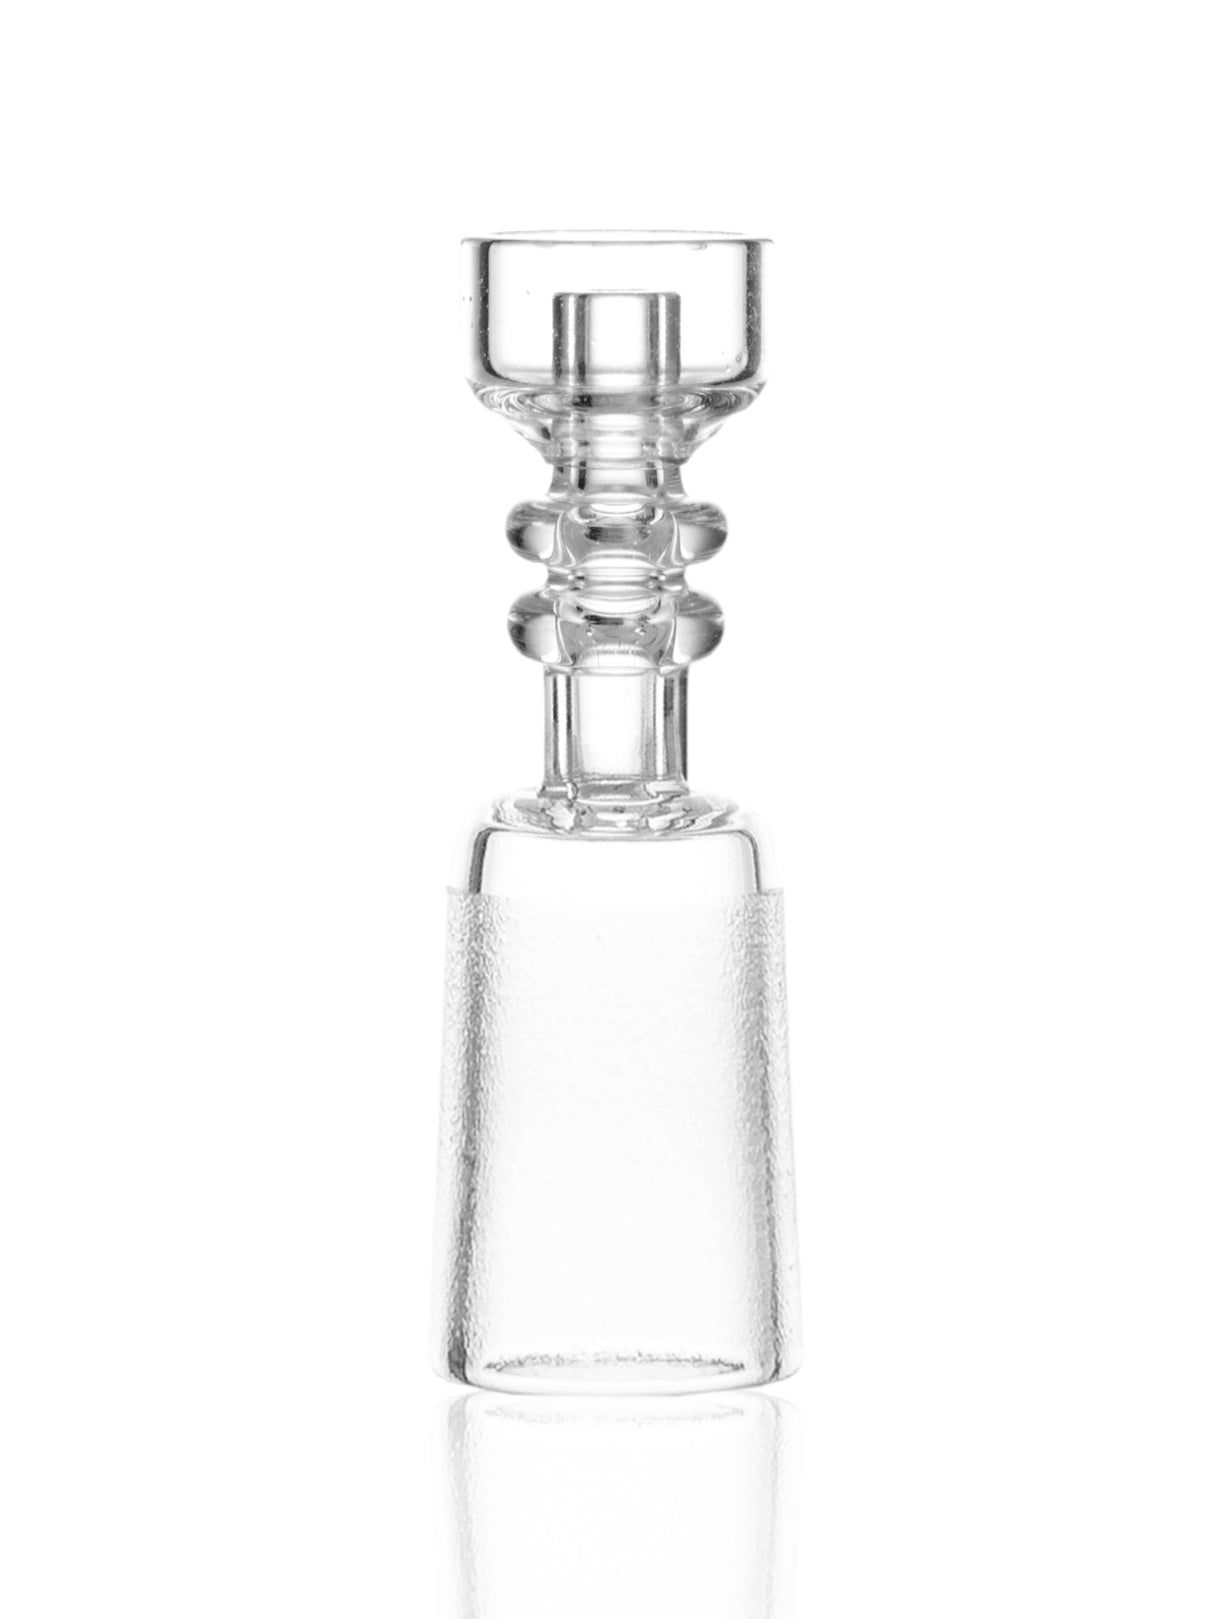 GRAV 14mm Female Domeless Nail for Dab Rigs, Clear Quartz, Front View on White Background